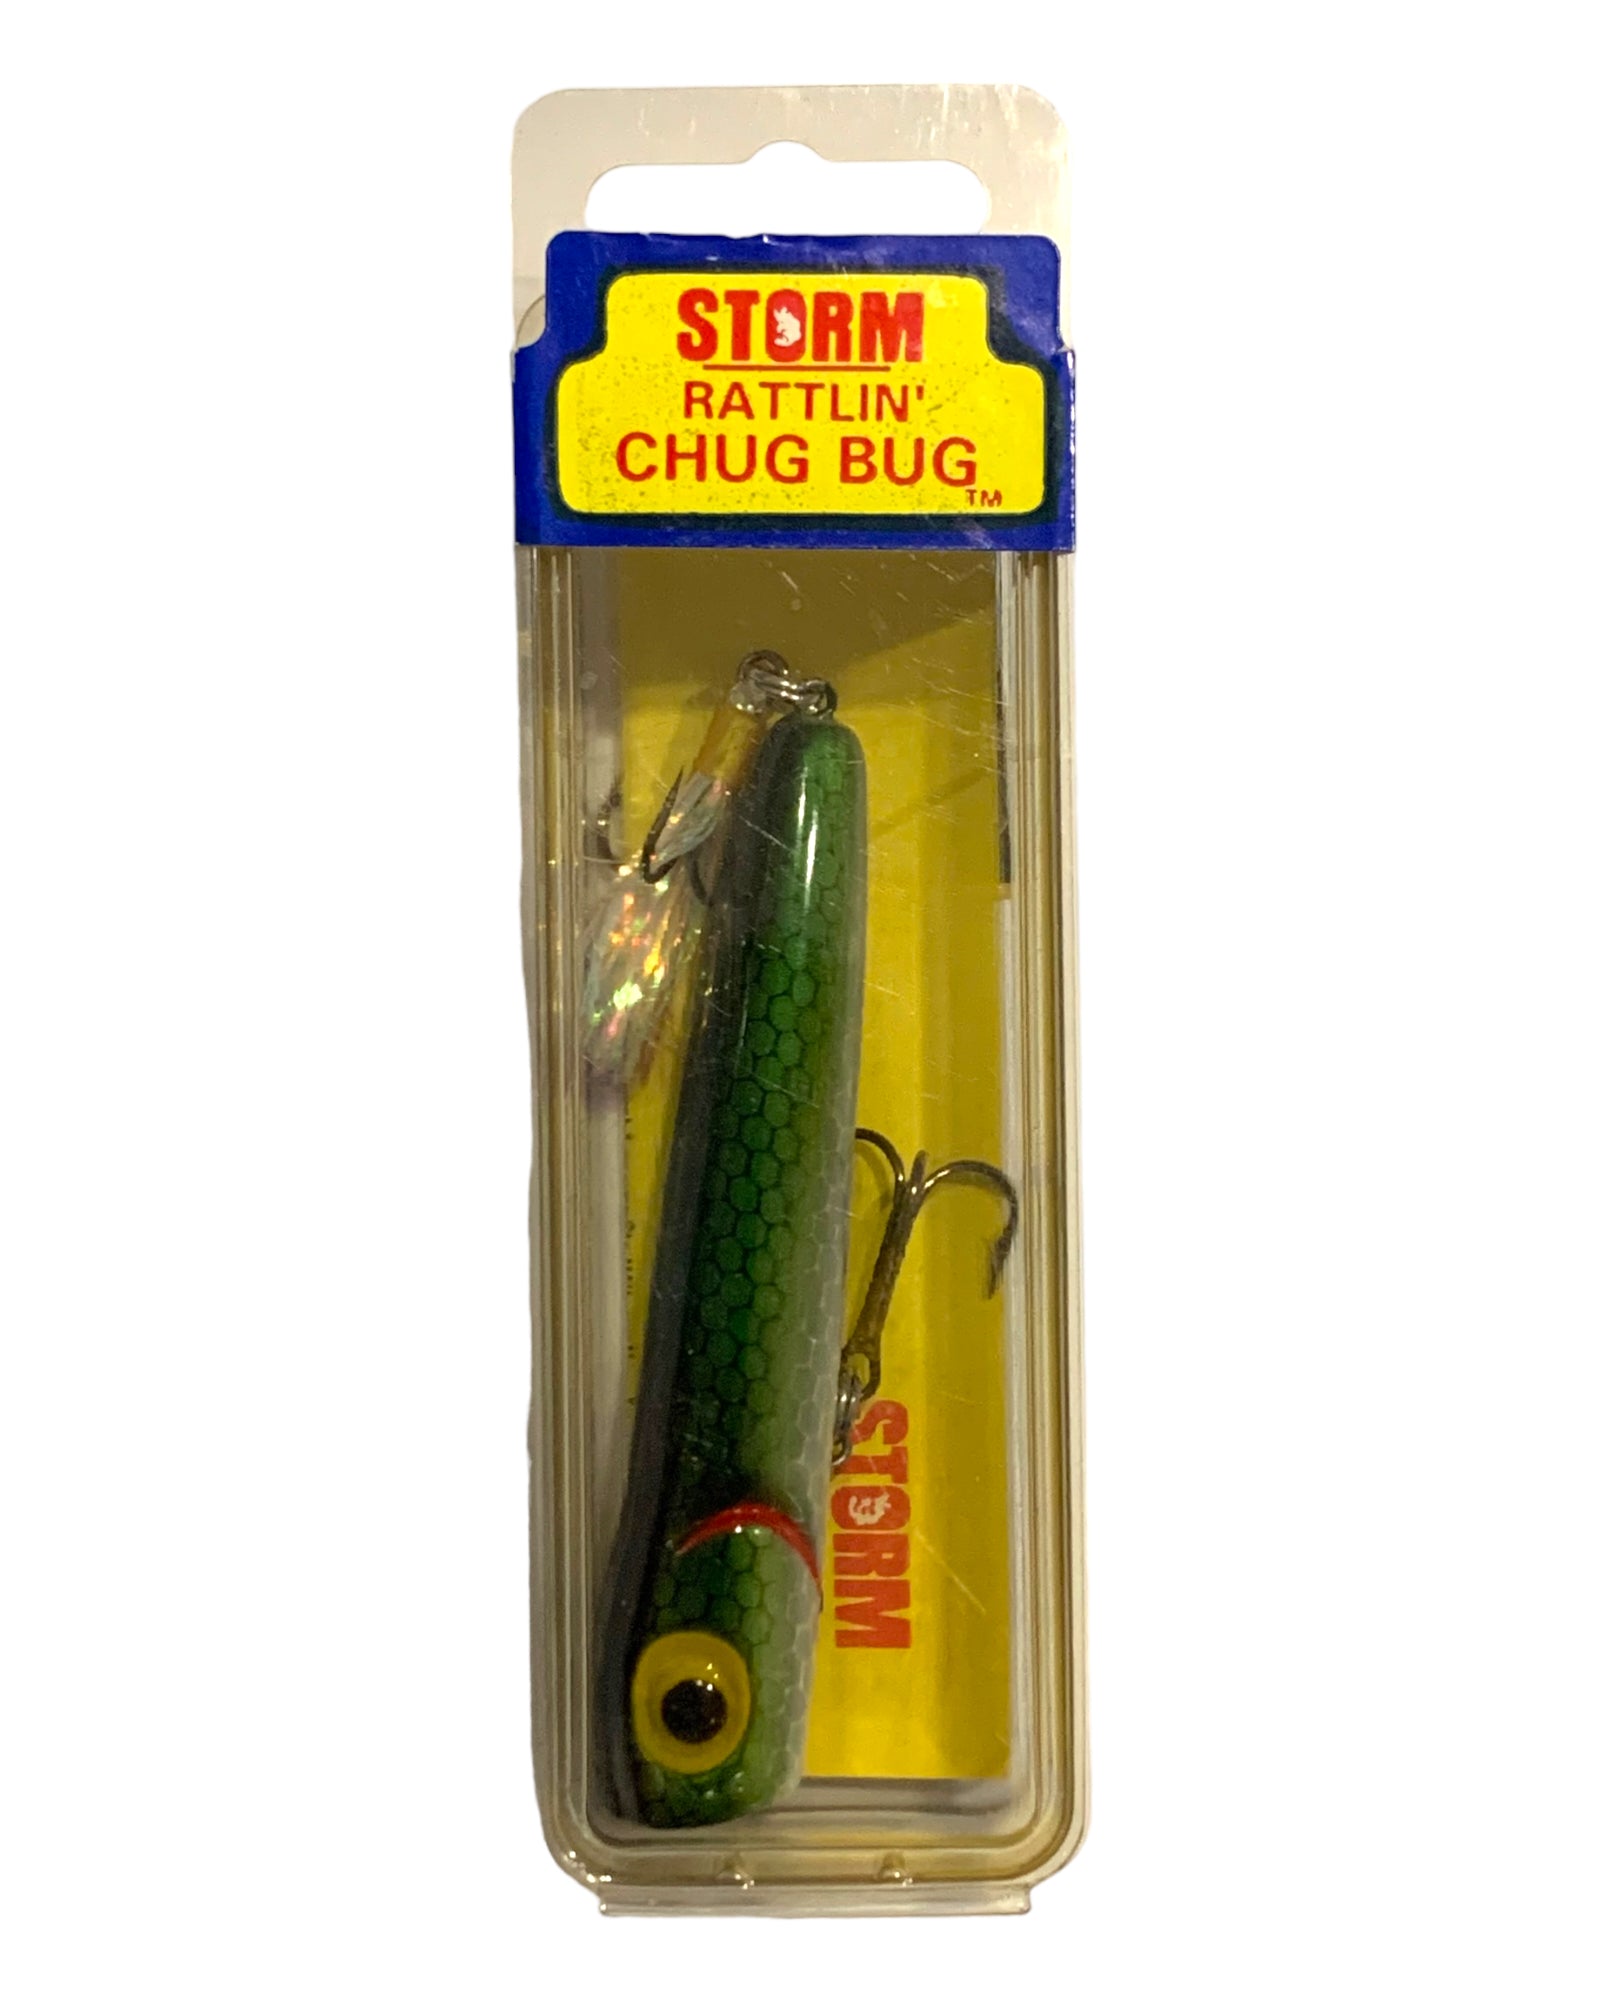 Lot of 4 Storm Rattlin Chugbugs Topwater Lure Nice Colors all with